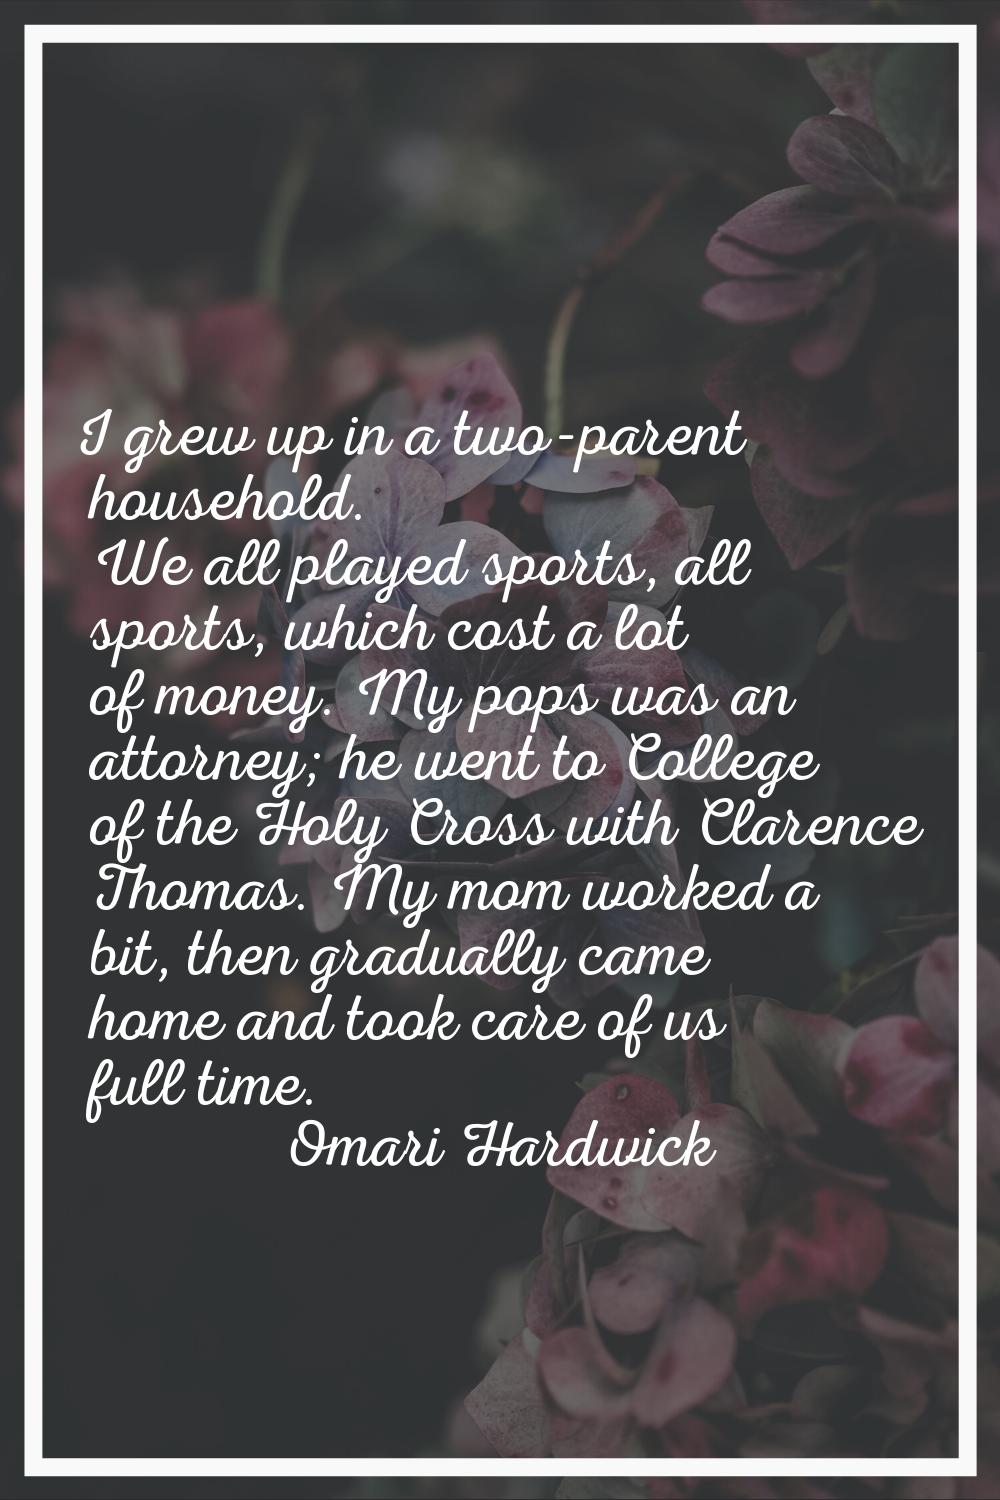 I grew up in a two-parent household. We all played sports, all sports, which cost a lot of money. M